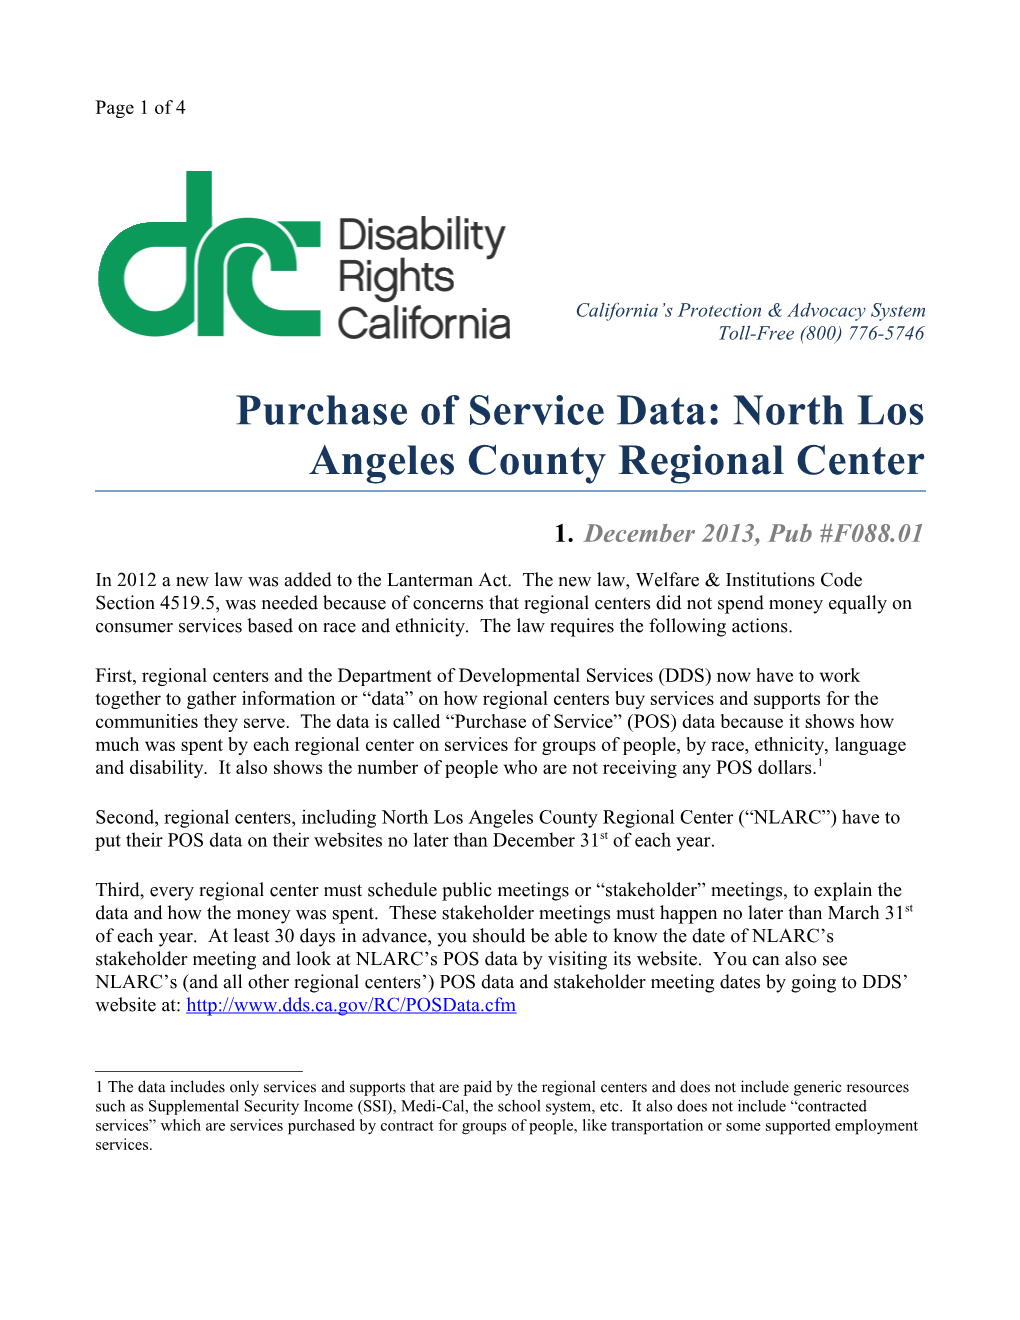 Purchase of Service Data: North Los Angeles County Regional Center